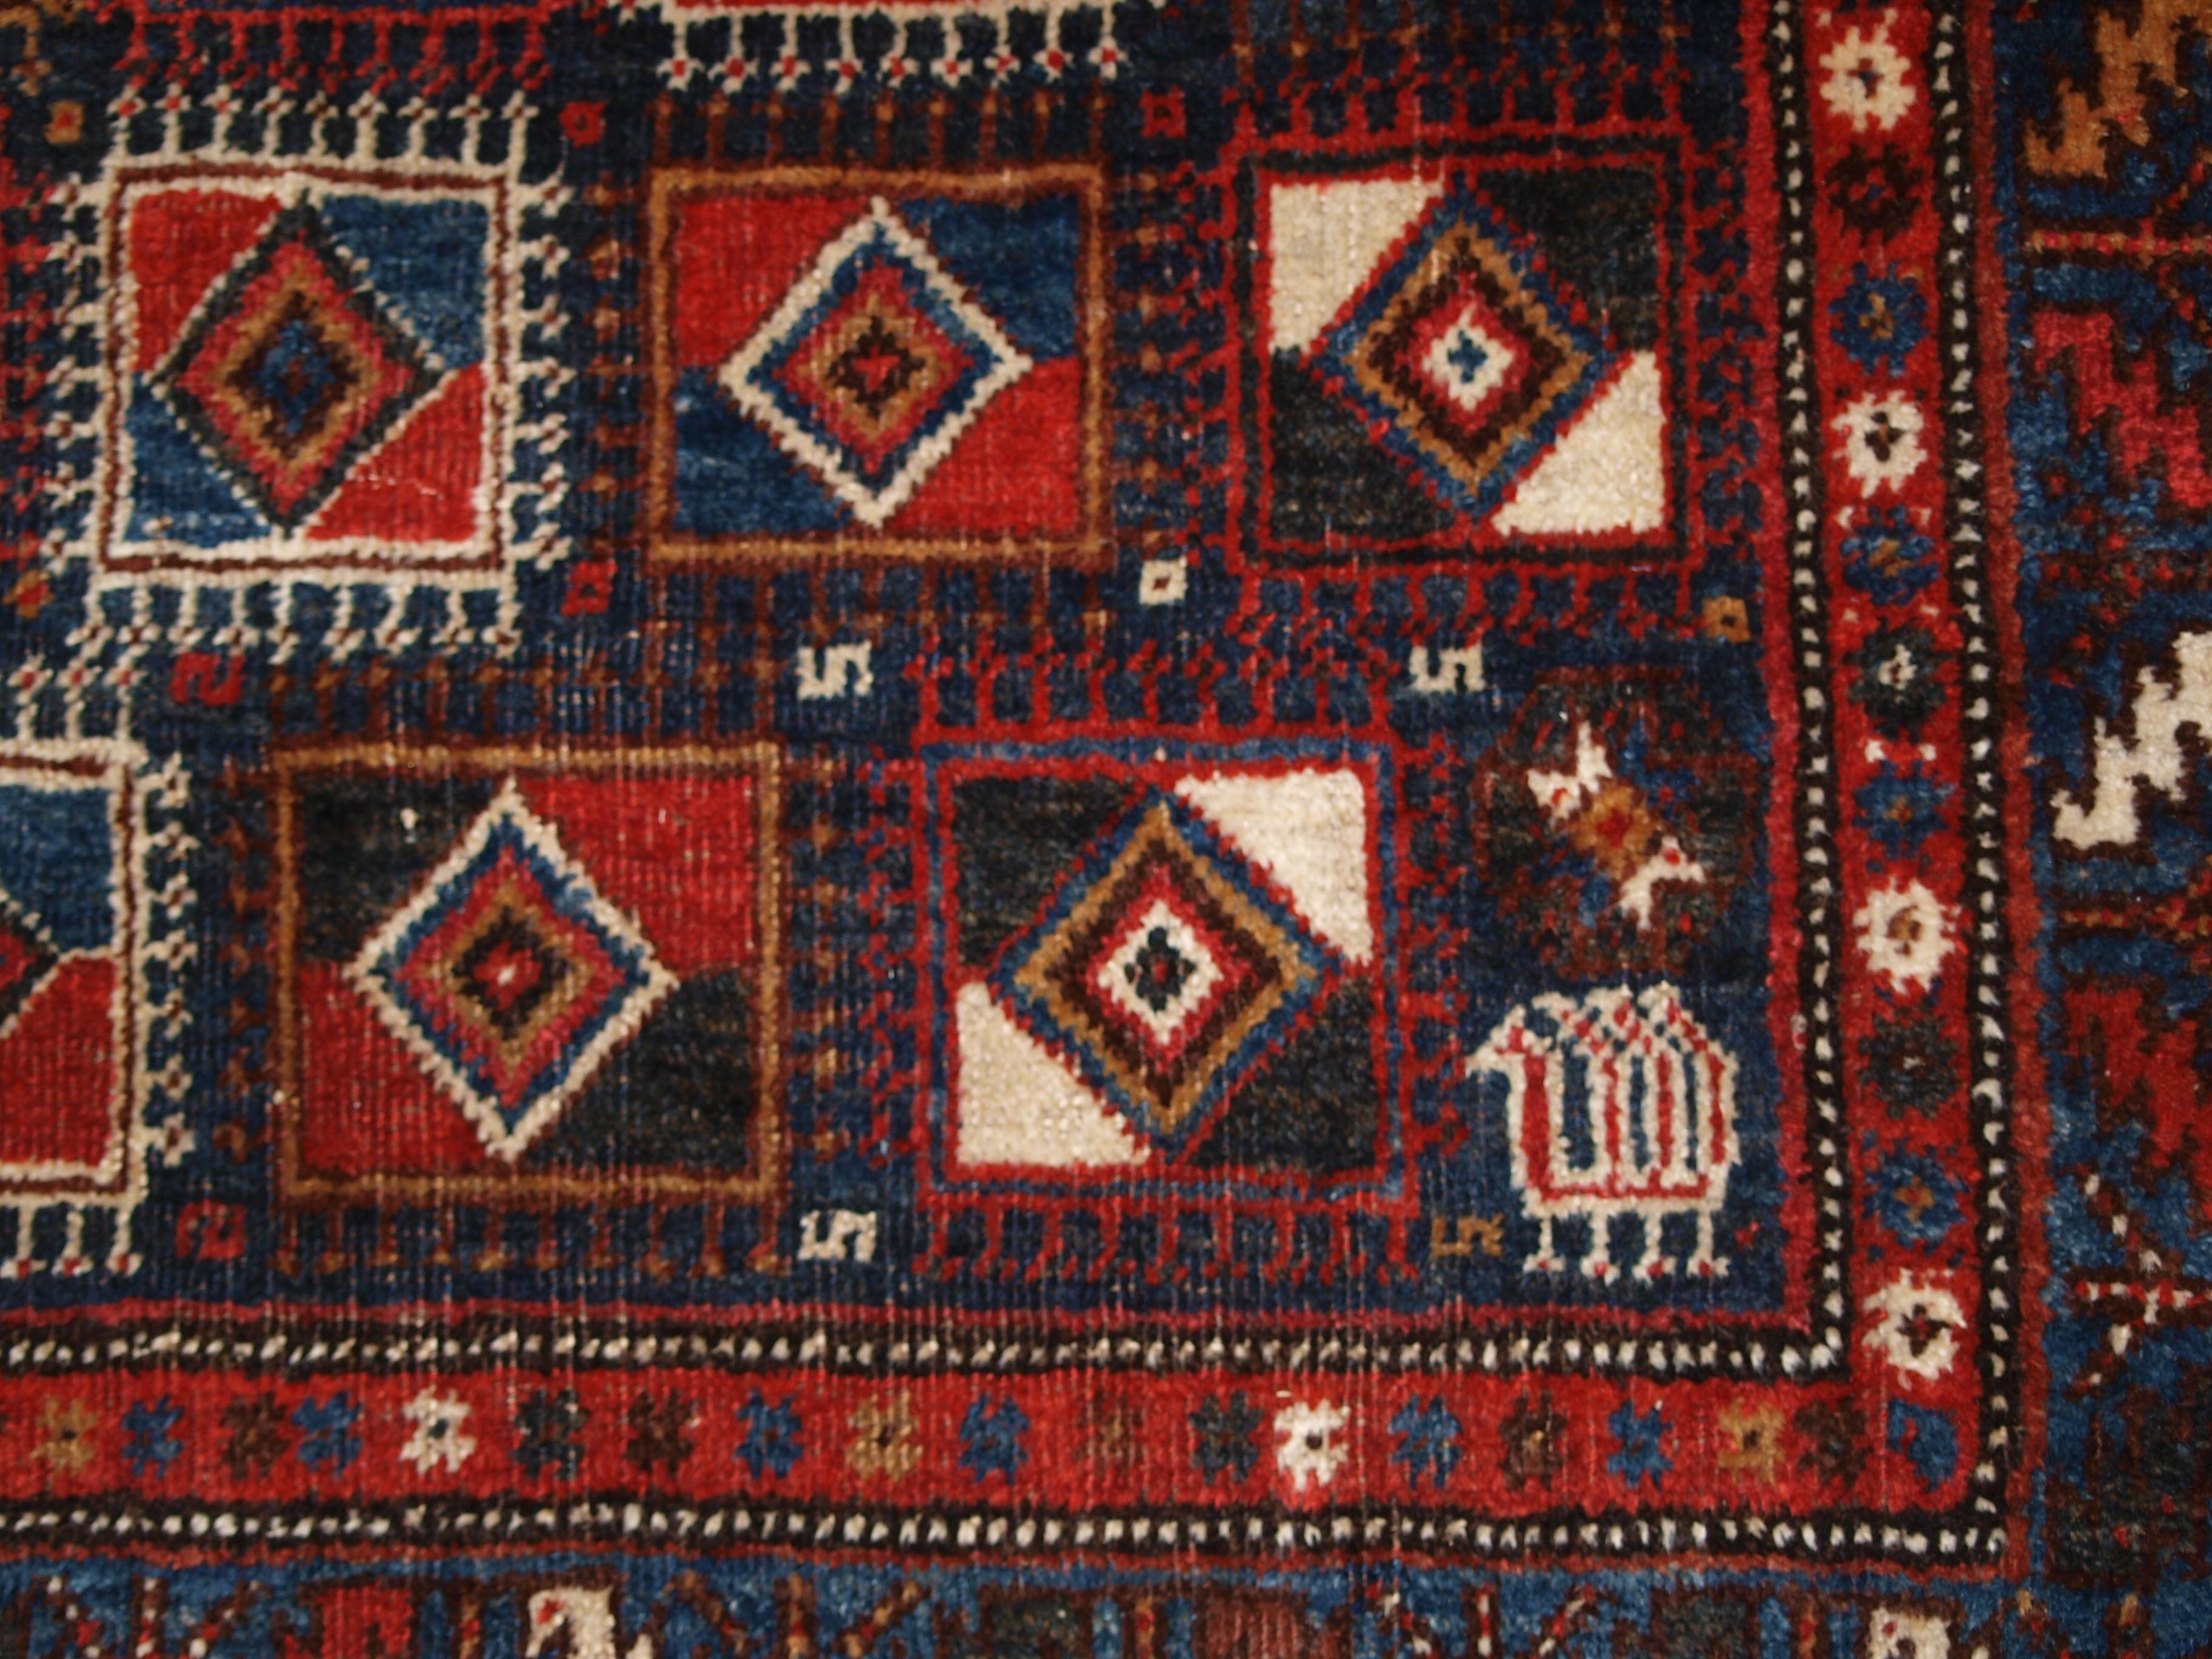 Wool Qashqai Long Rug, with Very Unusual Box Design Usually Found on Kilims For Sale